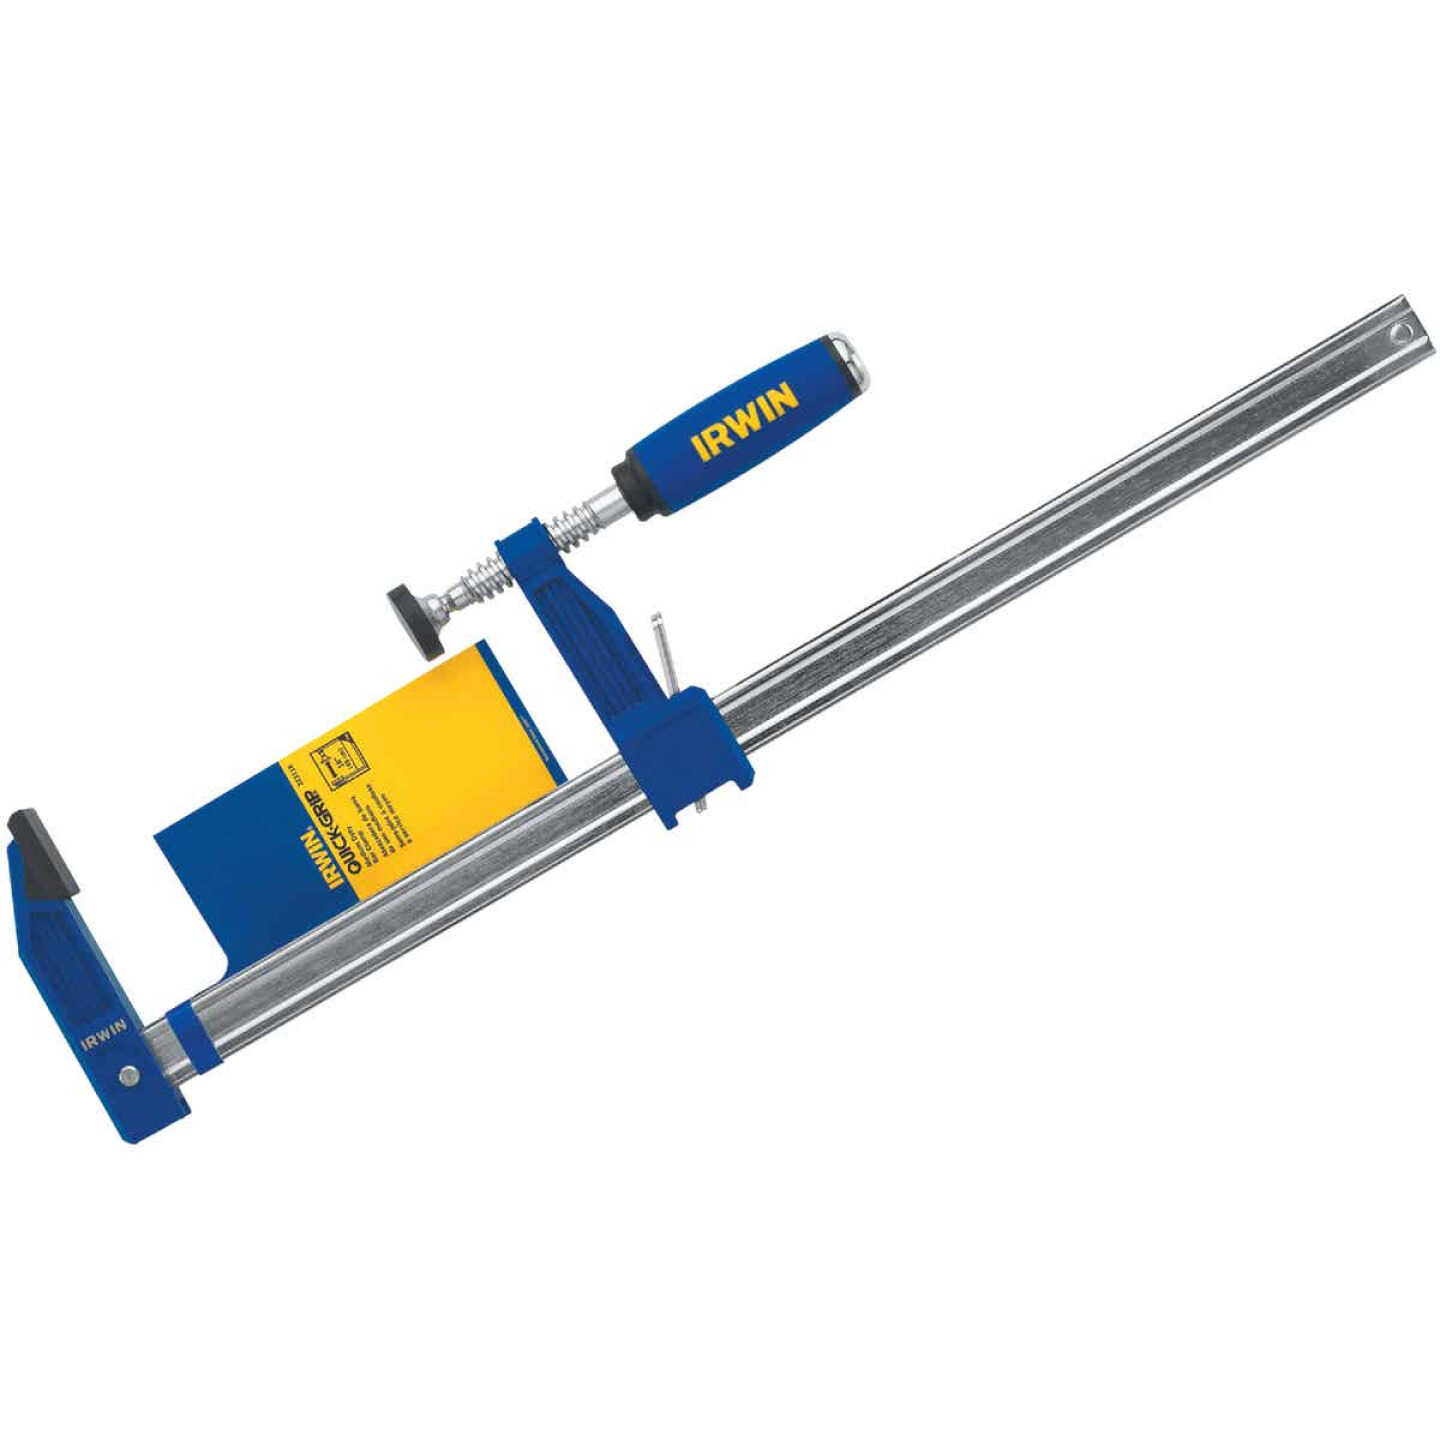 IRWIN Drain Removal Wrench at